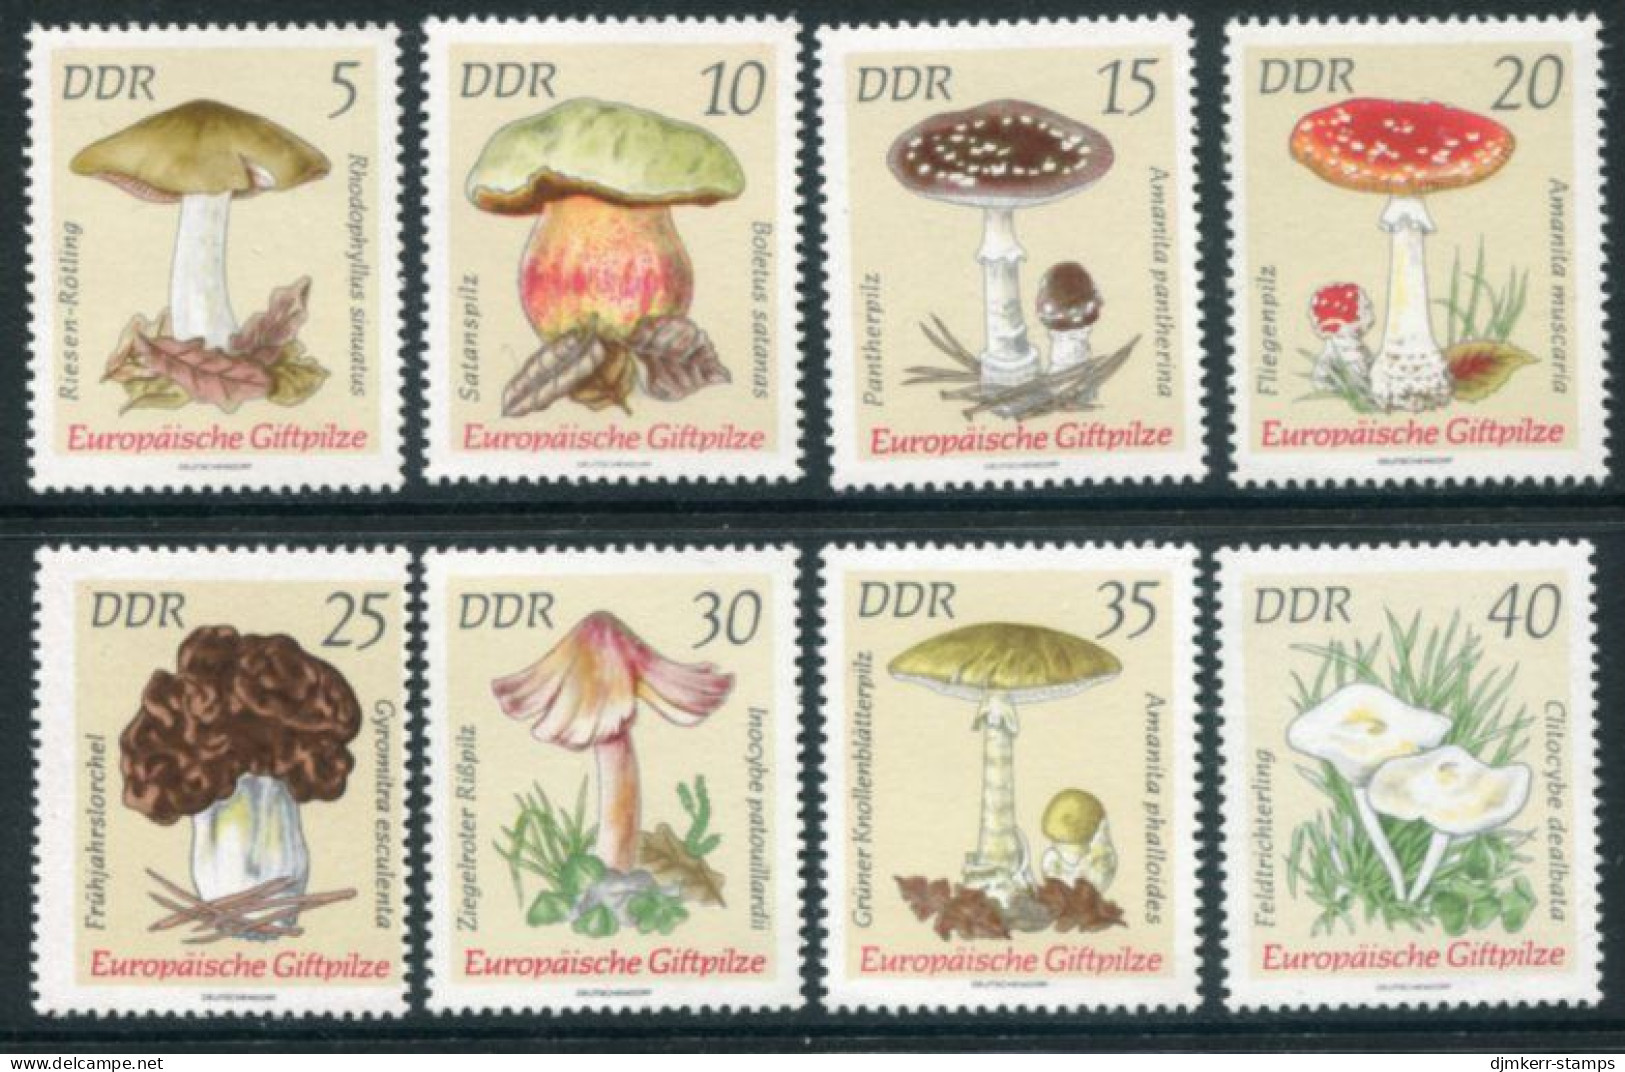 DDR / E. GERMANY 1974 Poisonous Fungi MNH / **  Michel 1933-40 - Unused Stamps